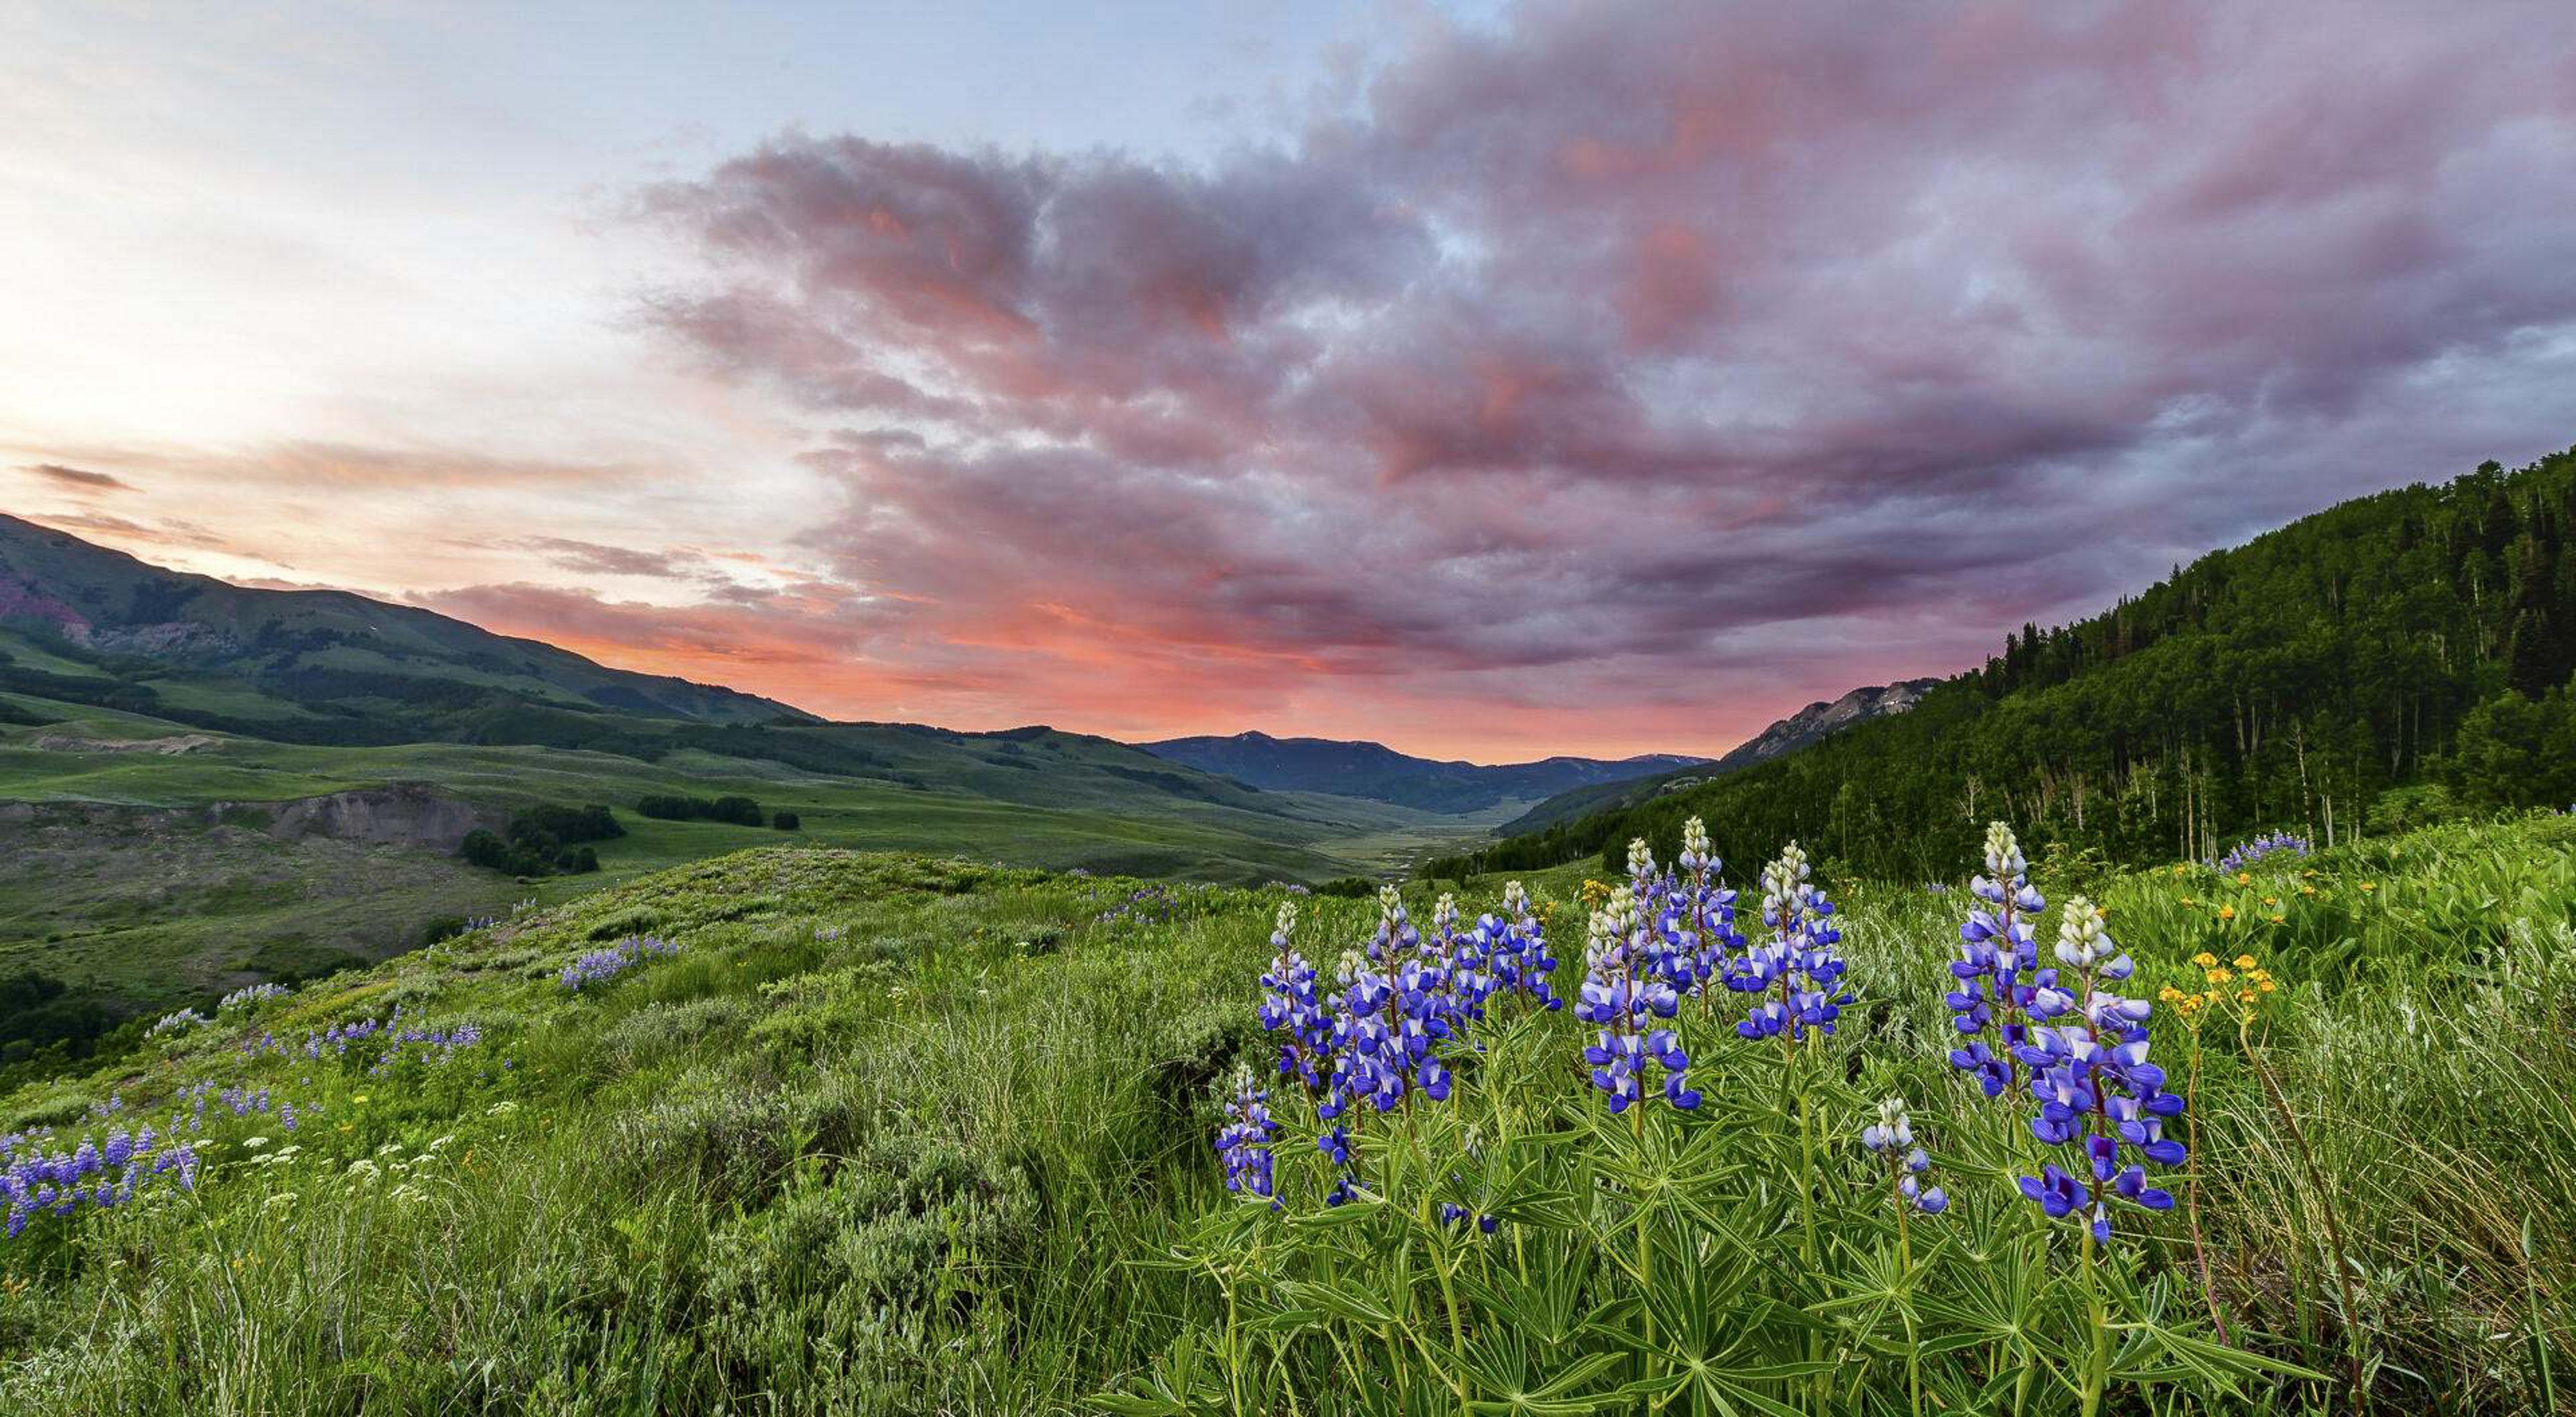 Purple wildflowers growing in a grass valley with mountains and a pink sunset in the background.